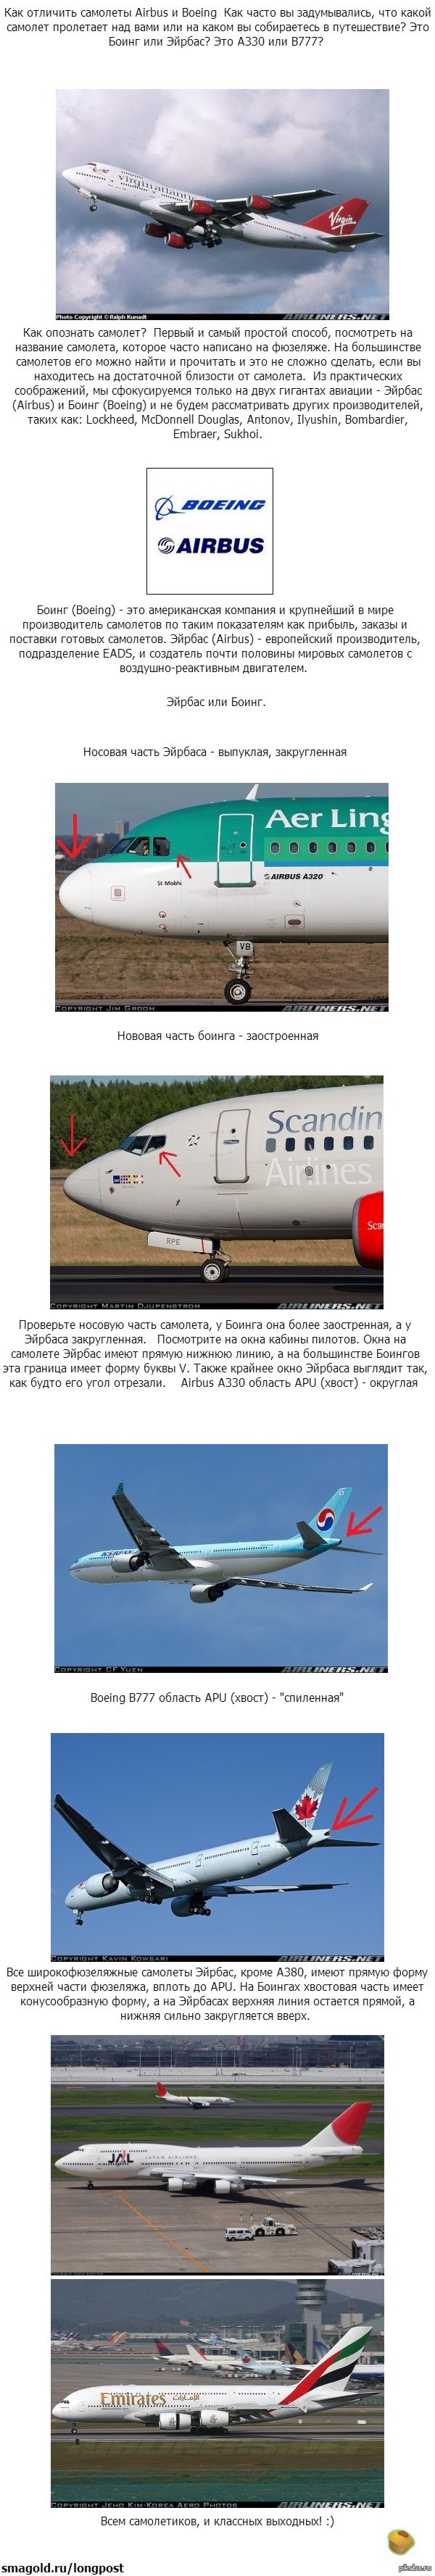 How to tell the difference between Boeing and Airbus. - Airplane, Differences